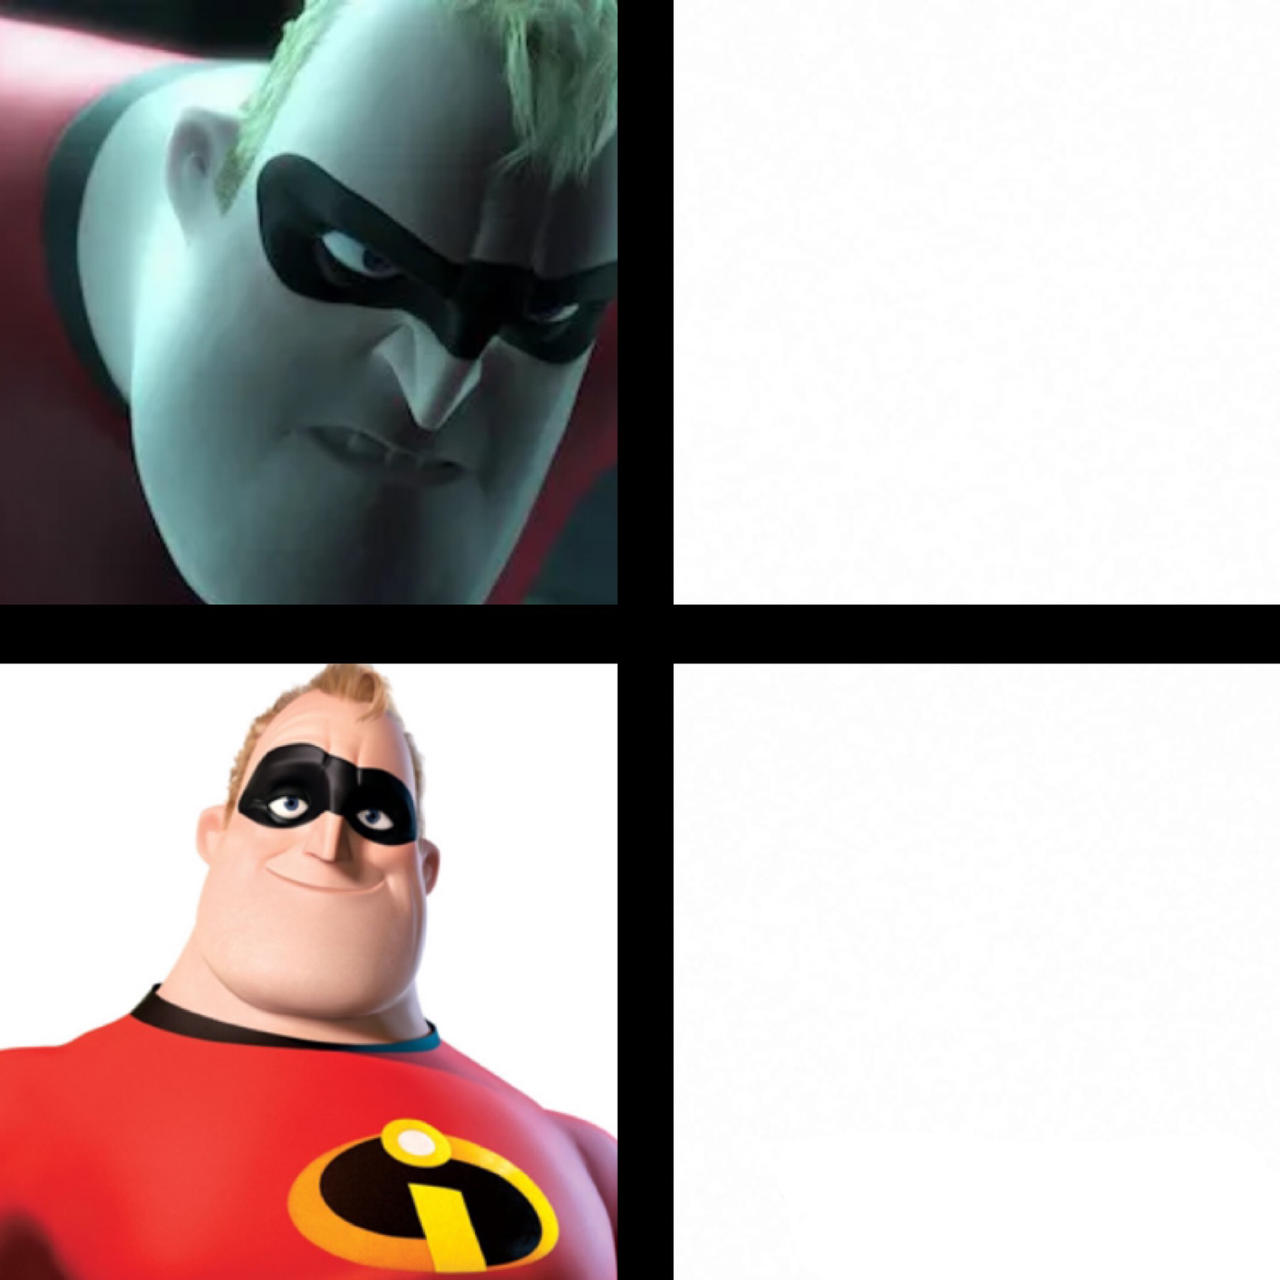 Mr. Incredible Prefers BLANK over BLANK by Collegeman1998 on DeviantArt